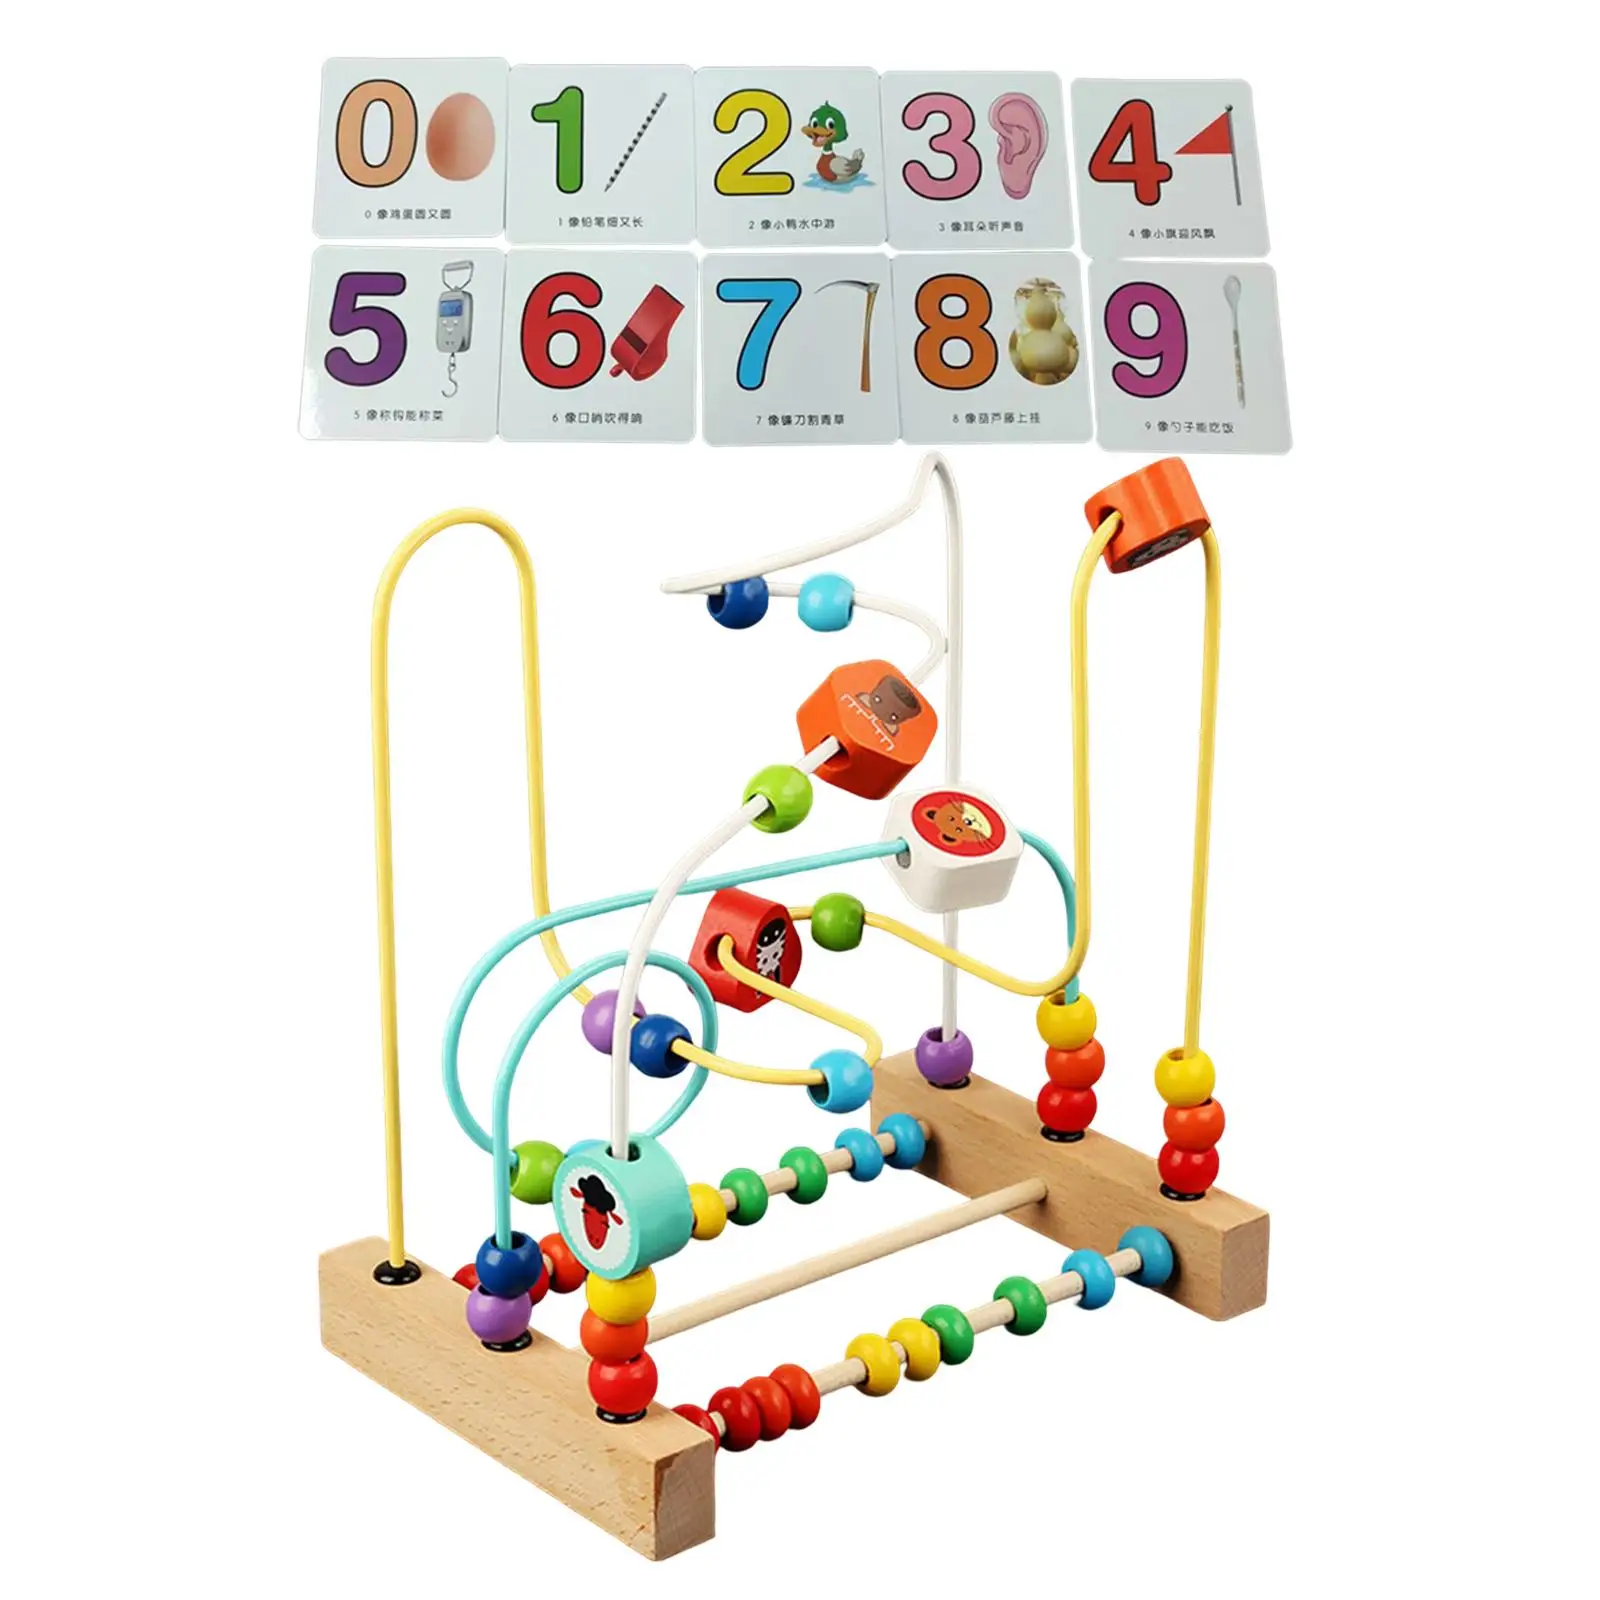 Bead Maze Roller Coaster Circle Toy Fine Motor Skill Activity Toy for Infant